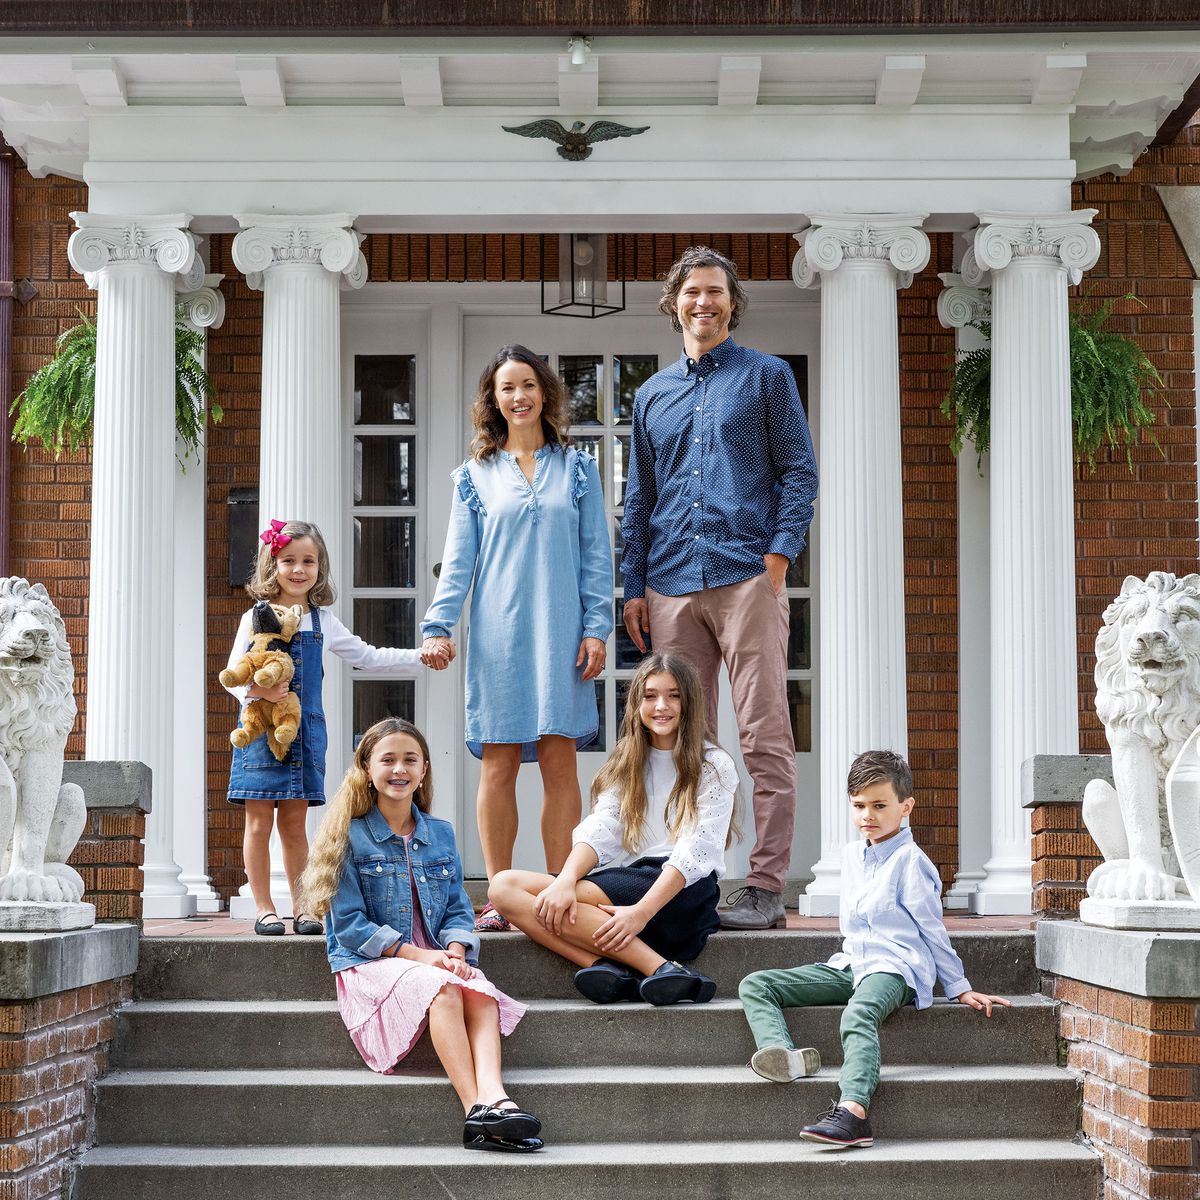 The Beller family in front of their renovated home